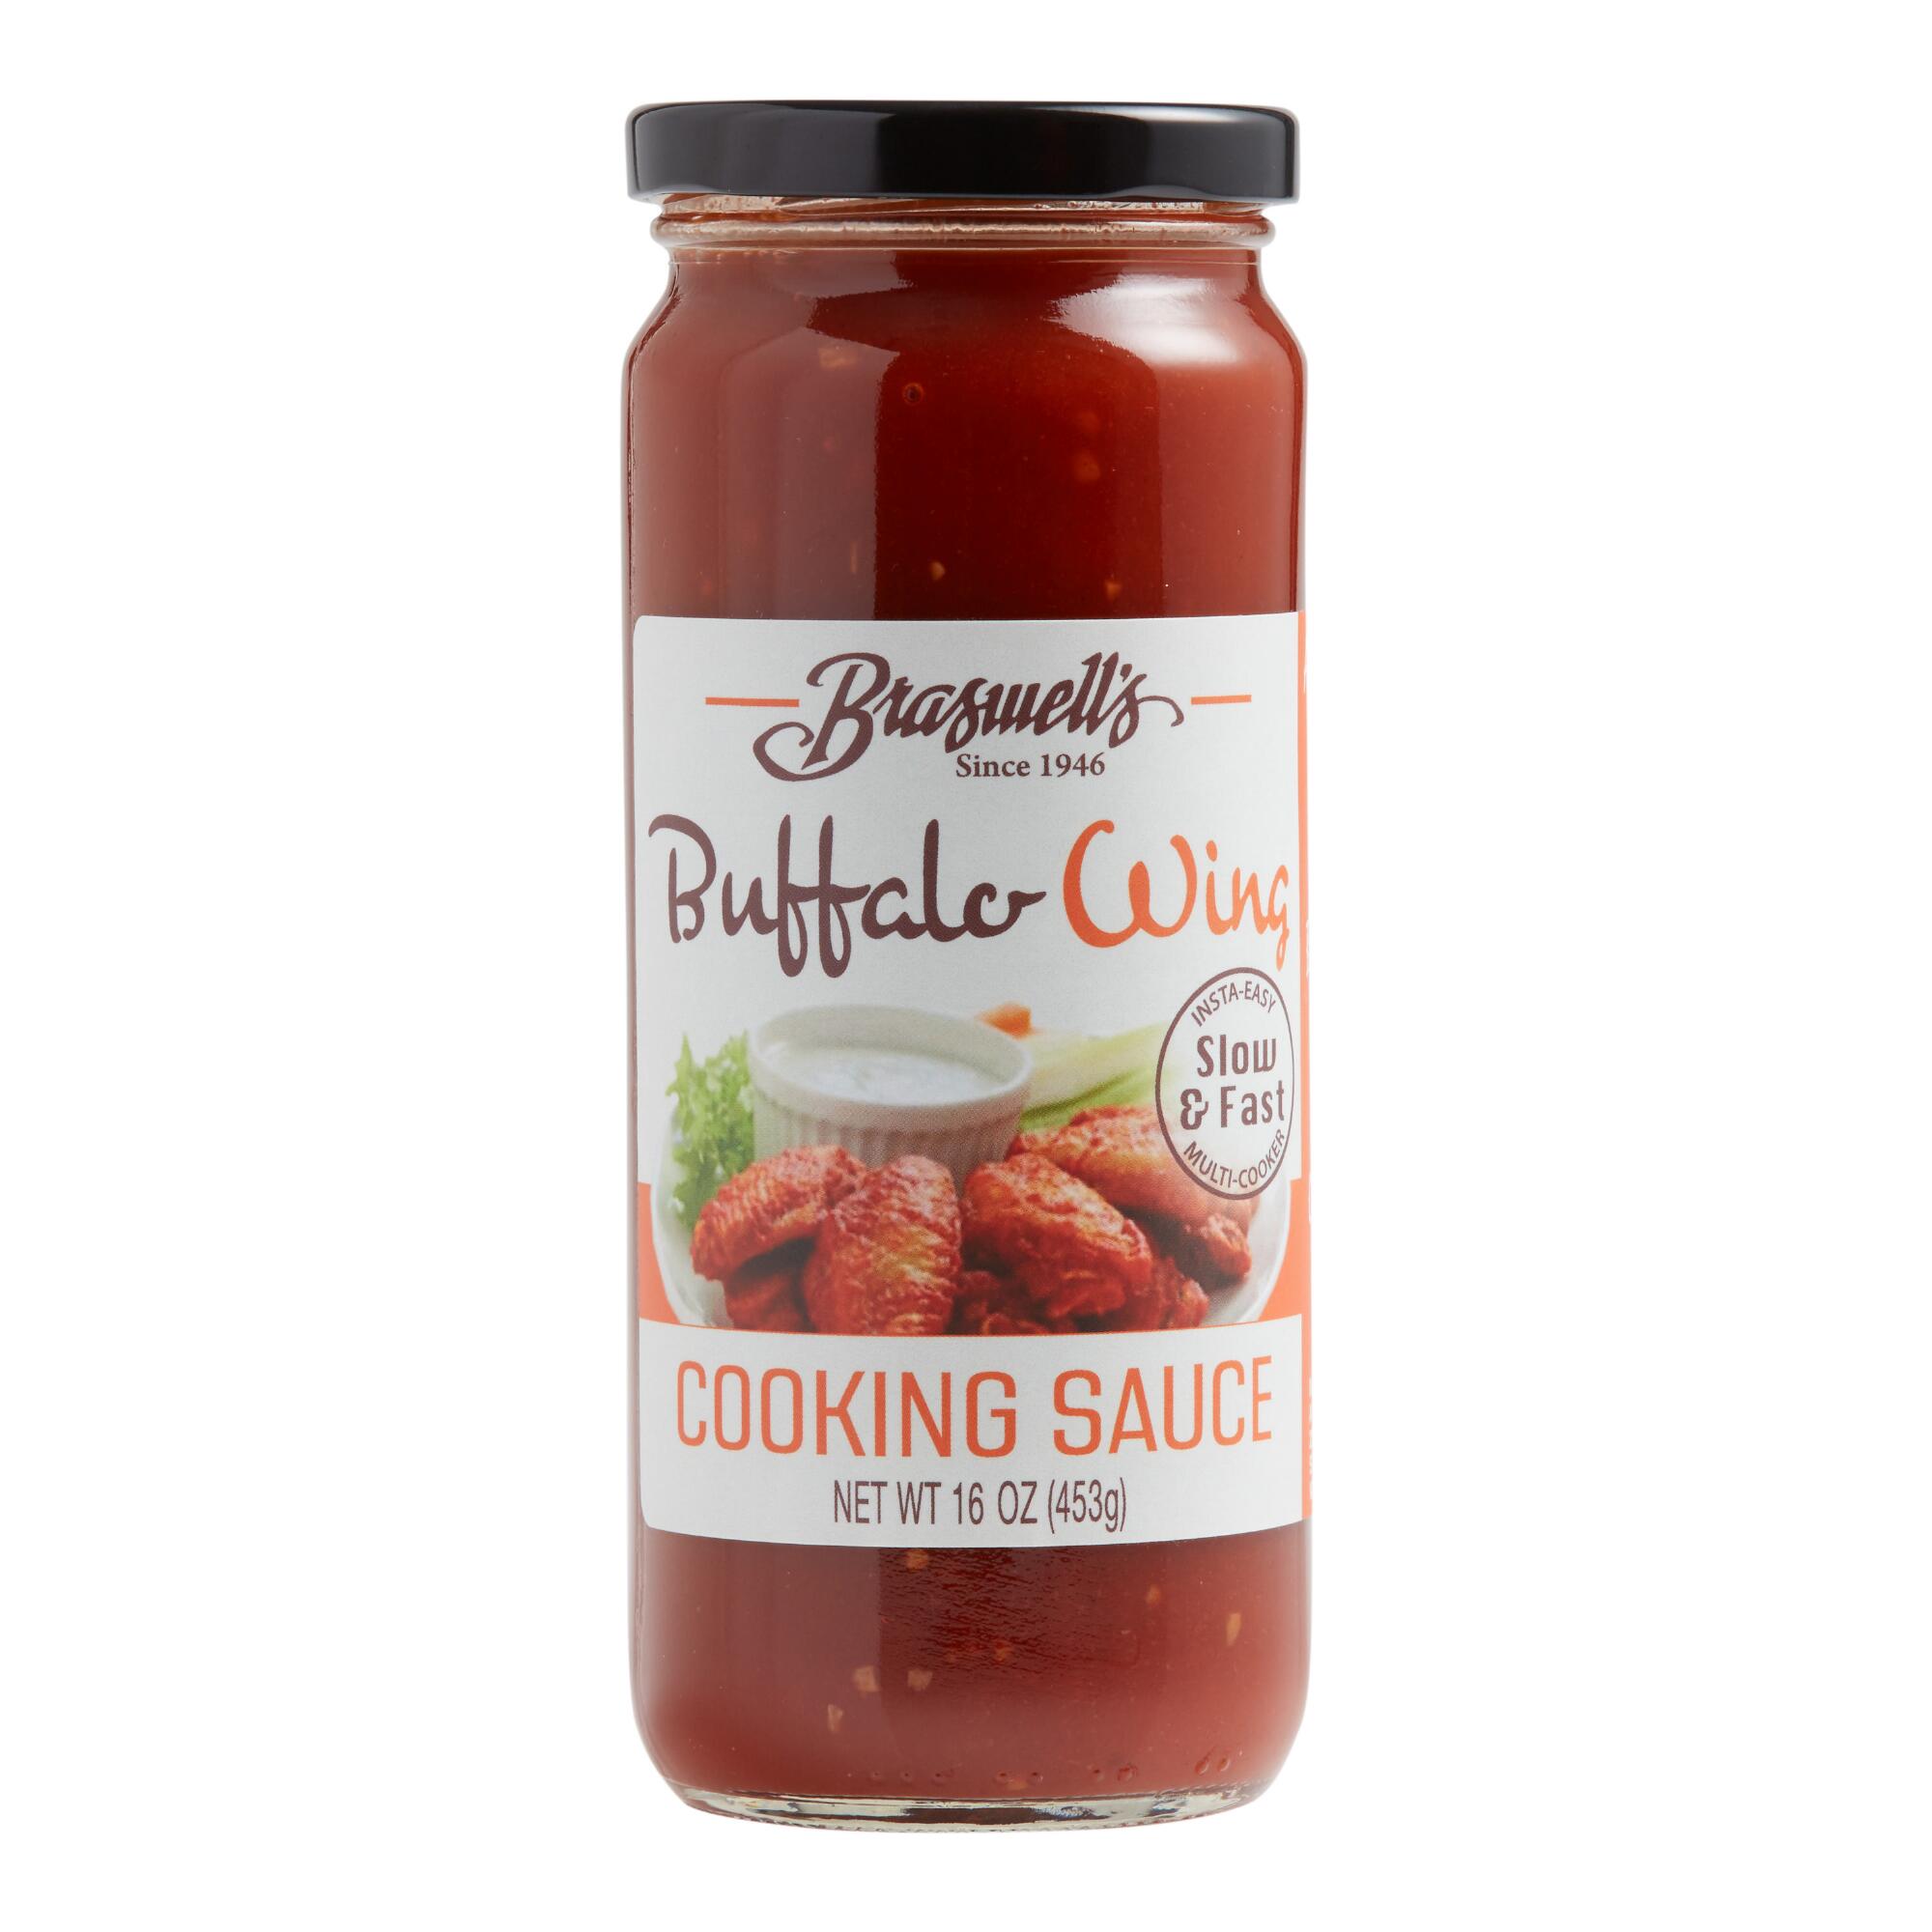 Braswell's Buffalo Wings Slow Cooker Cooking Sauce by World Market